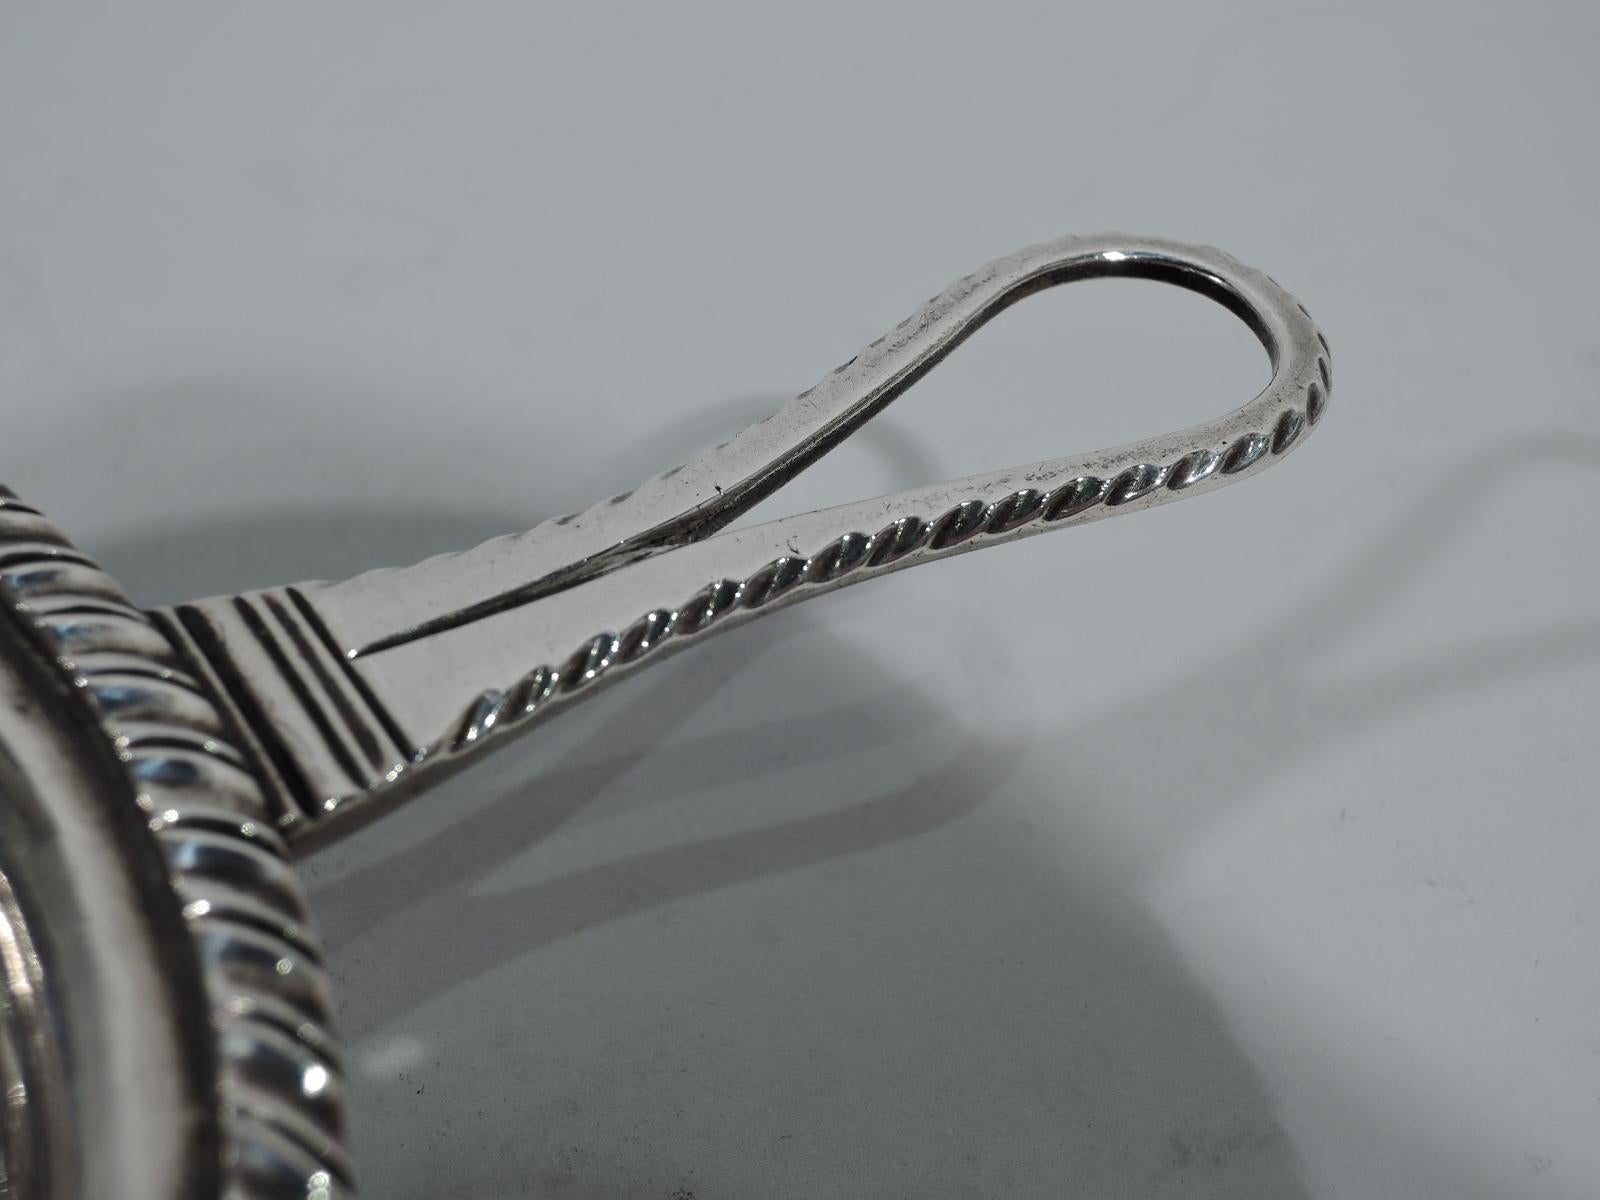 Antique European silver strainer, circa 1840. Round bowl with concentric piercing, gadrooned rim, and feathered open loop handle. On handle back is engraved shaded block monogram NP. Marked. Weight: 5.5 troy ounces.